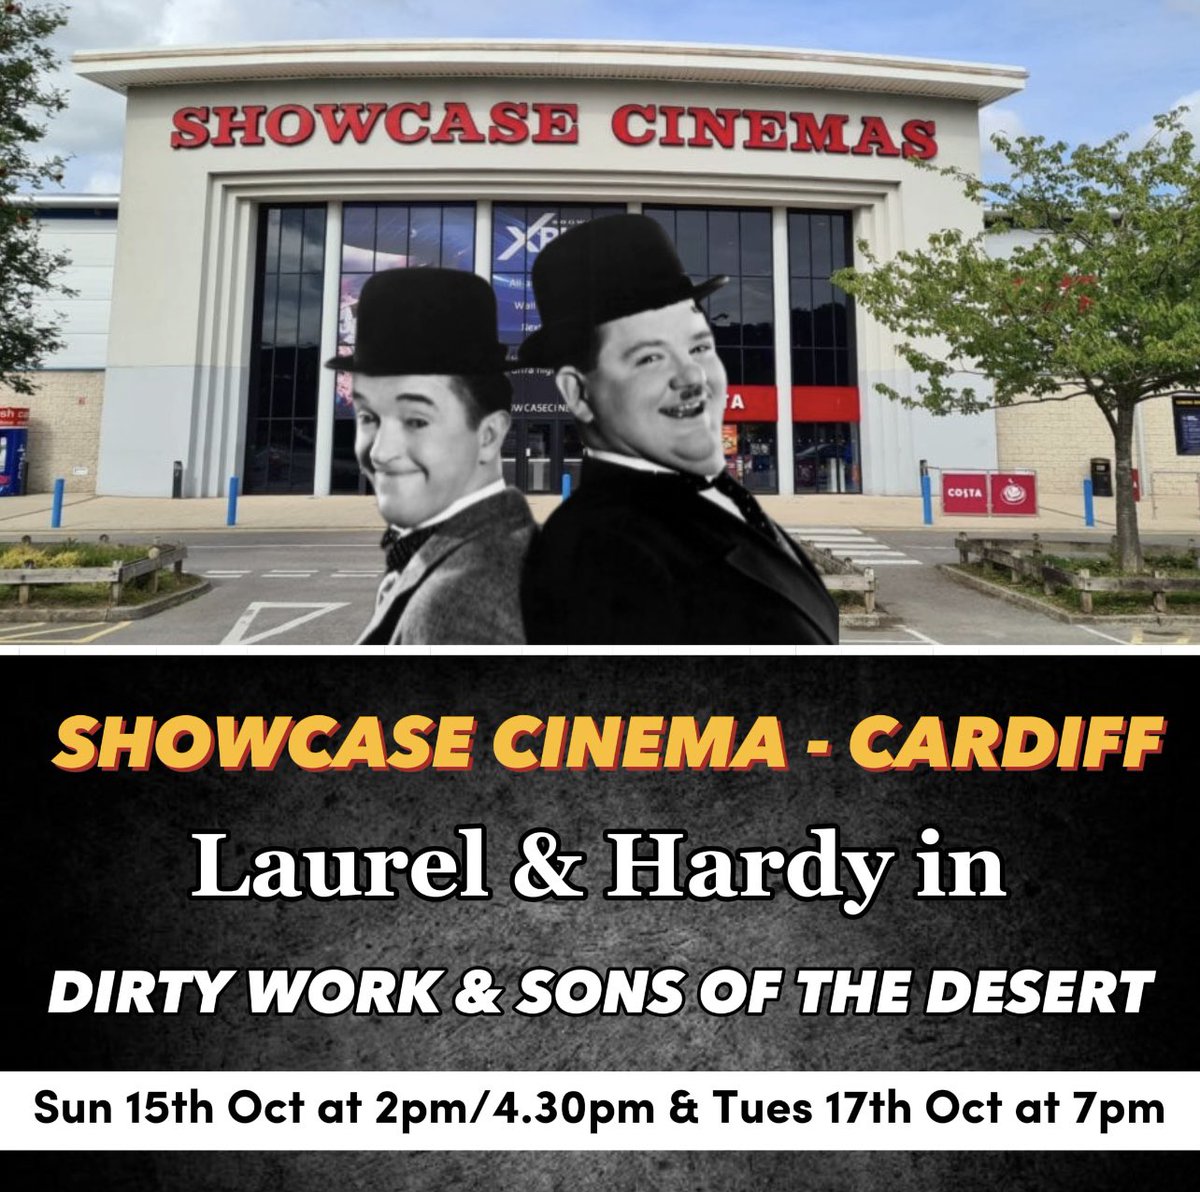 Laurel and Hardy fans in CARDIFF (Nantgarw) -  Laurel & Hardy Double Bill: The worldwide premiere of the new restoration of Dirty Work followed by the recently restored version of Sons Of The Desert.  SUN OCT 15 & TUES OCT 17. 
Tickets at showcasecinemas.co.uk/film-info/laur…